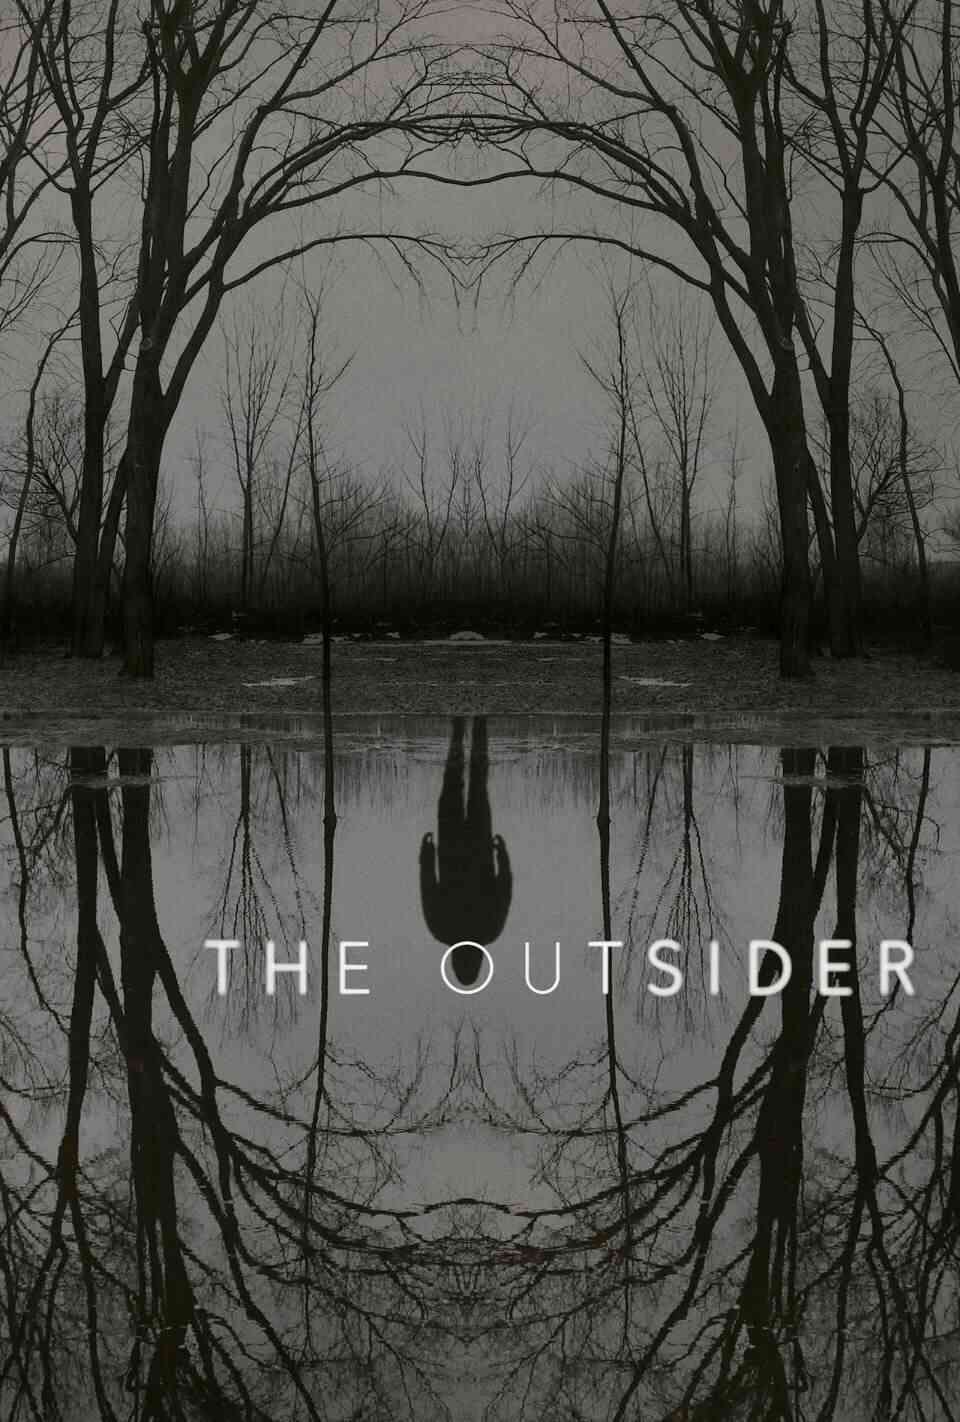 Read The Outsider screenplay (poster)